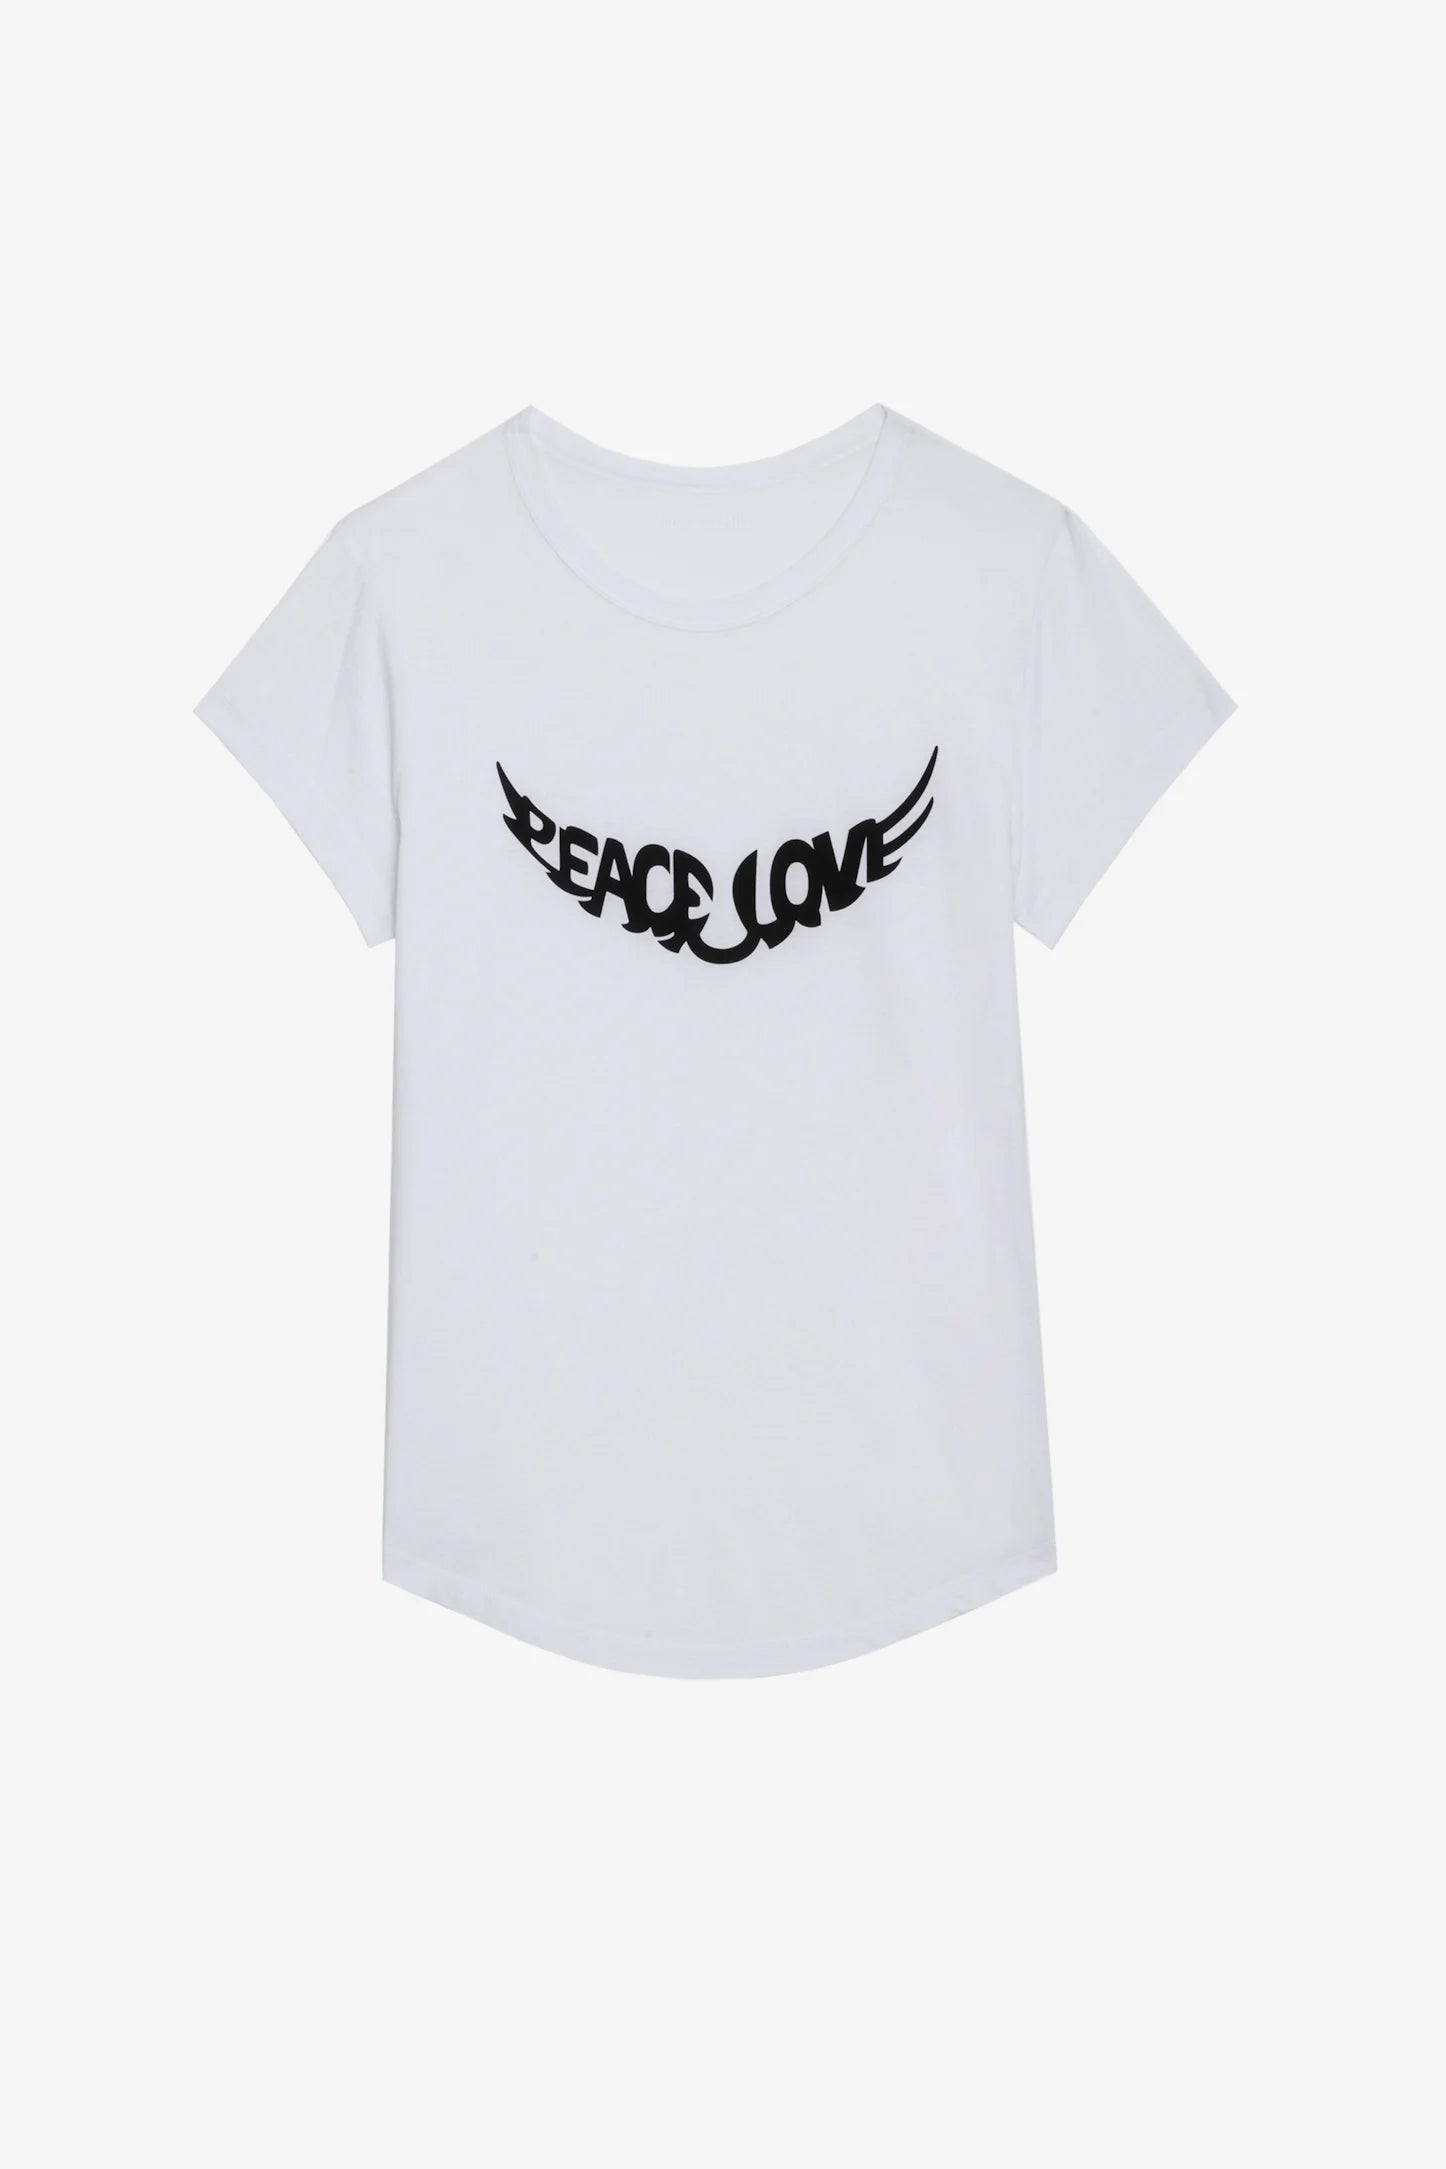 Zadig & Voltaire Woop Peace & Love Wings T-Shirt